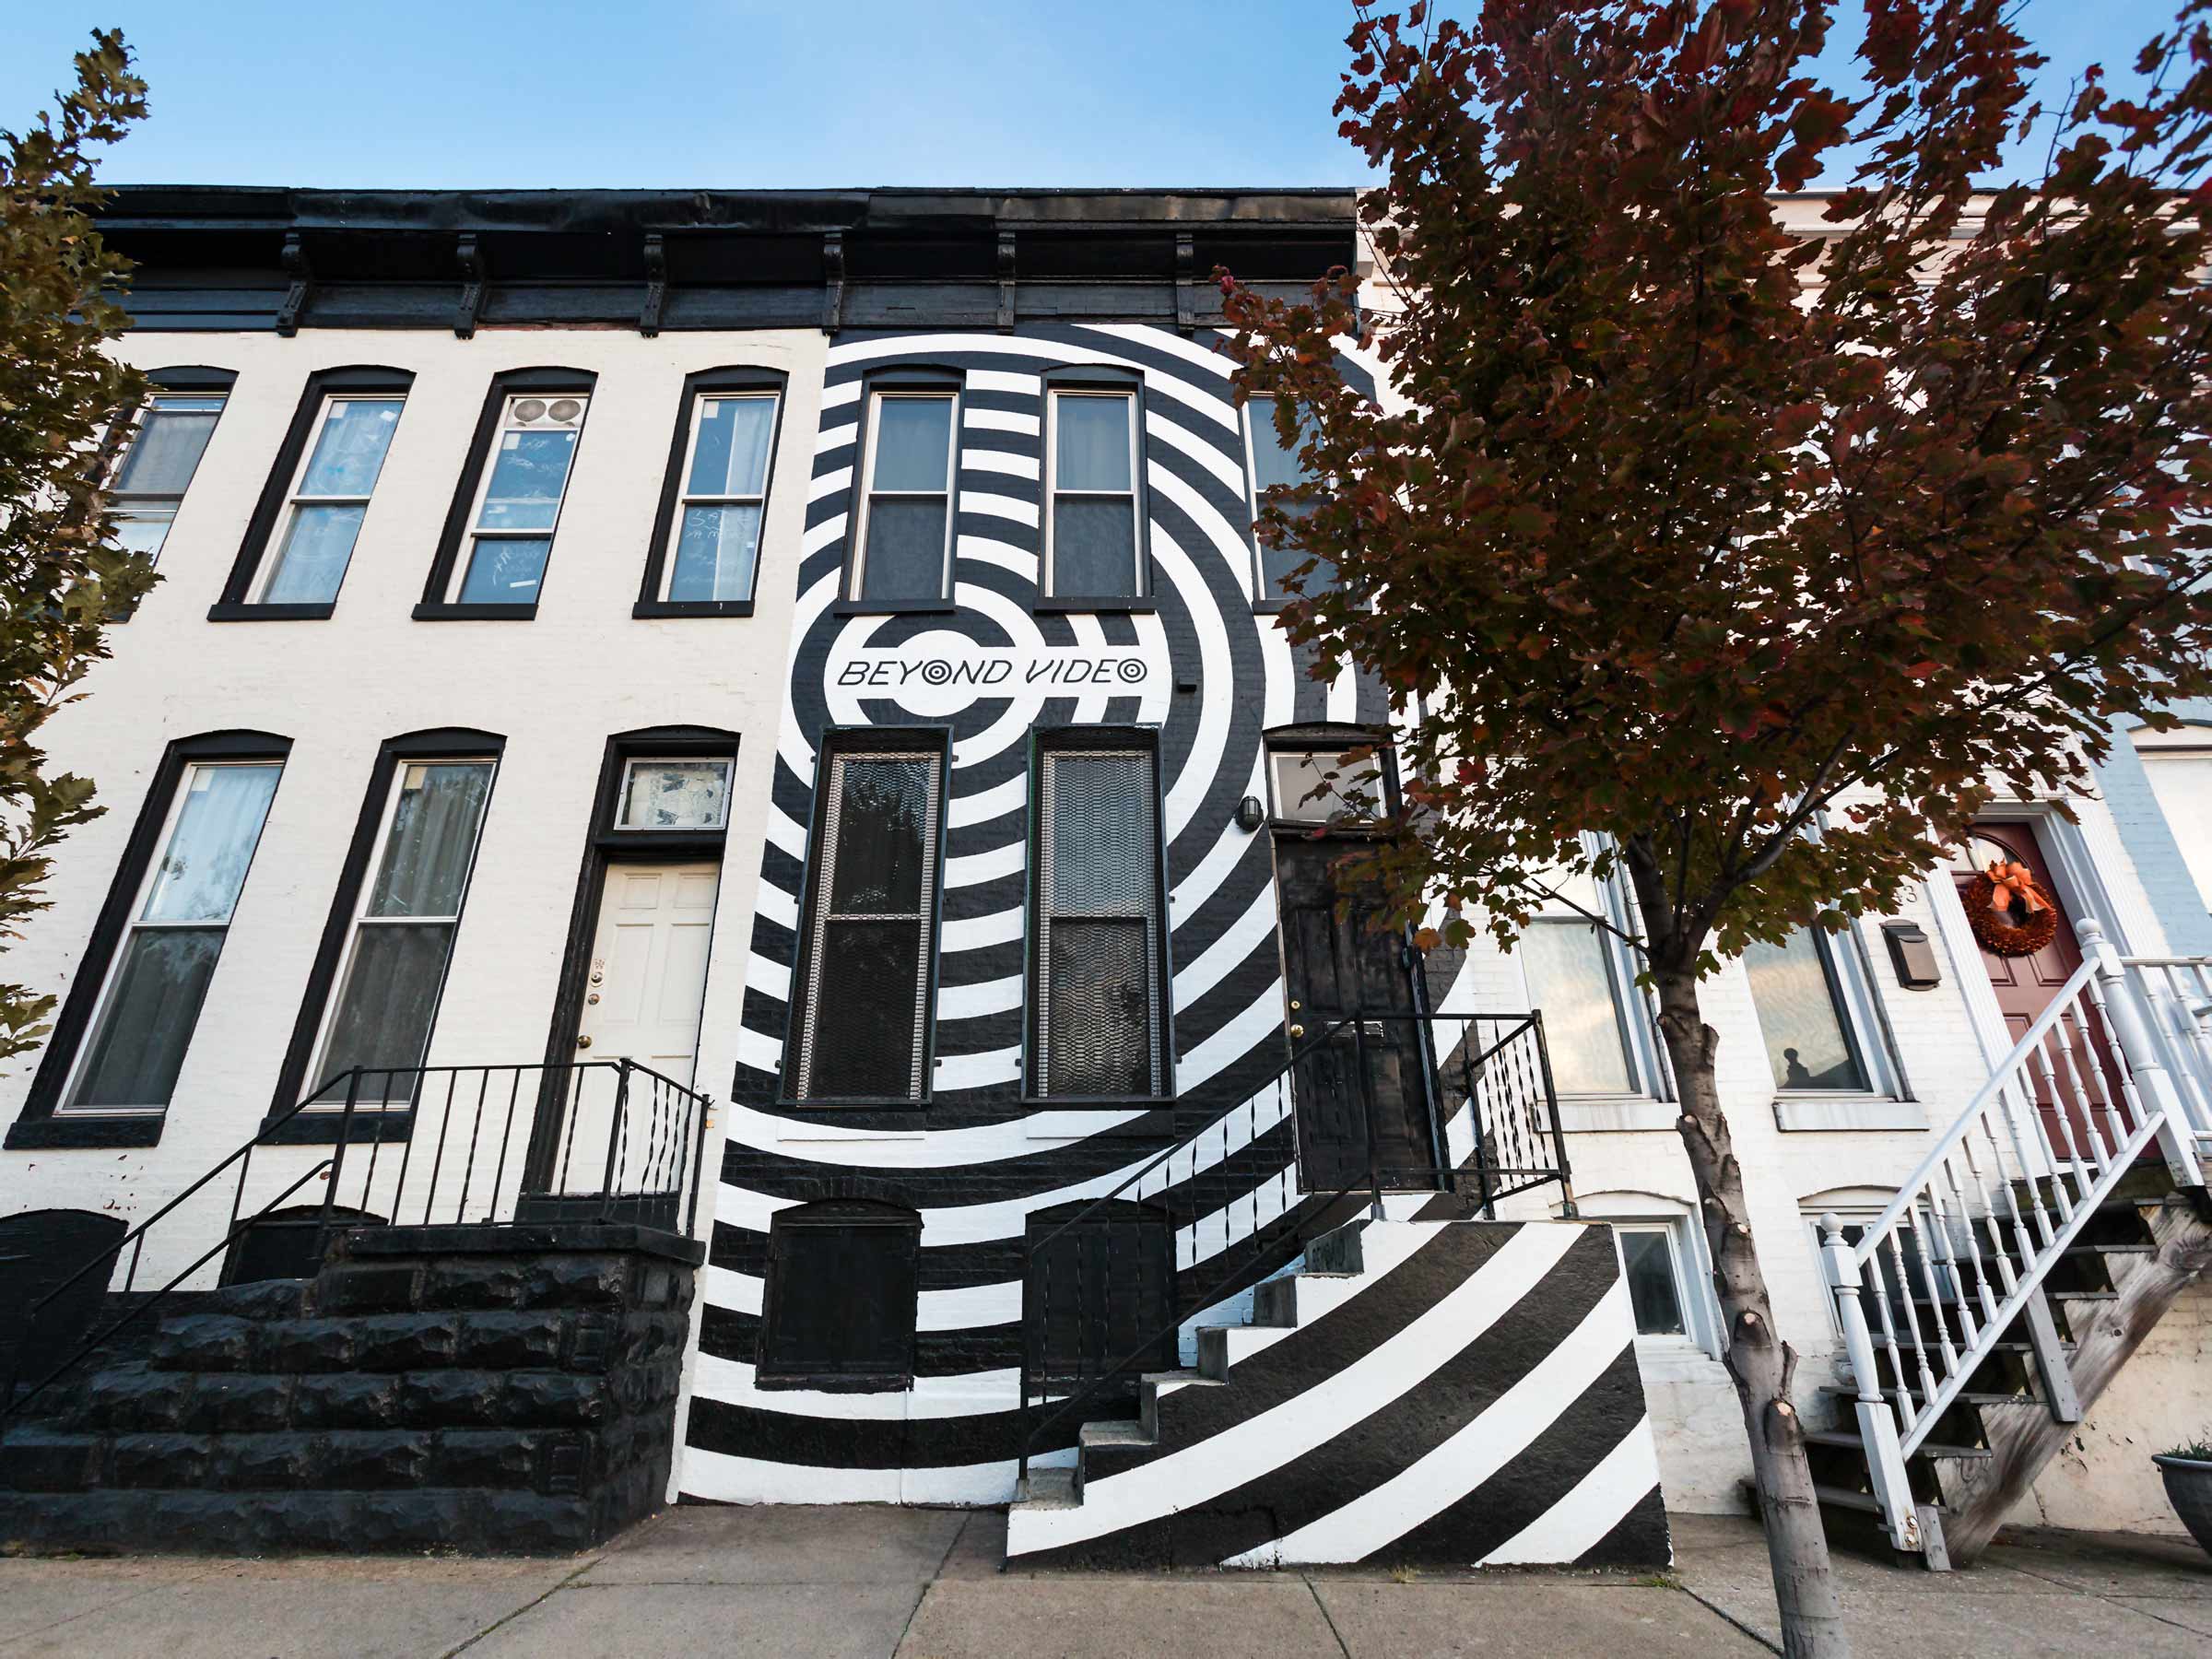 A high-contrast supergraphic black and white mural covering the entire facade of a Baltimore rowhouse with giant black concentric rings, the storefront for Beyond Video, a contemporary video store and lending library